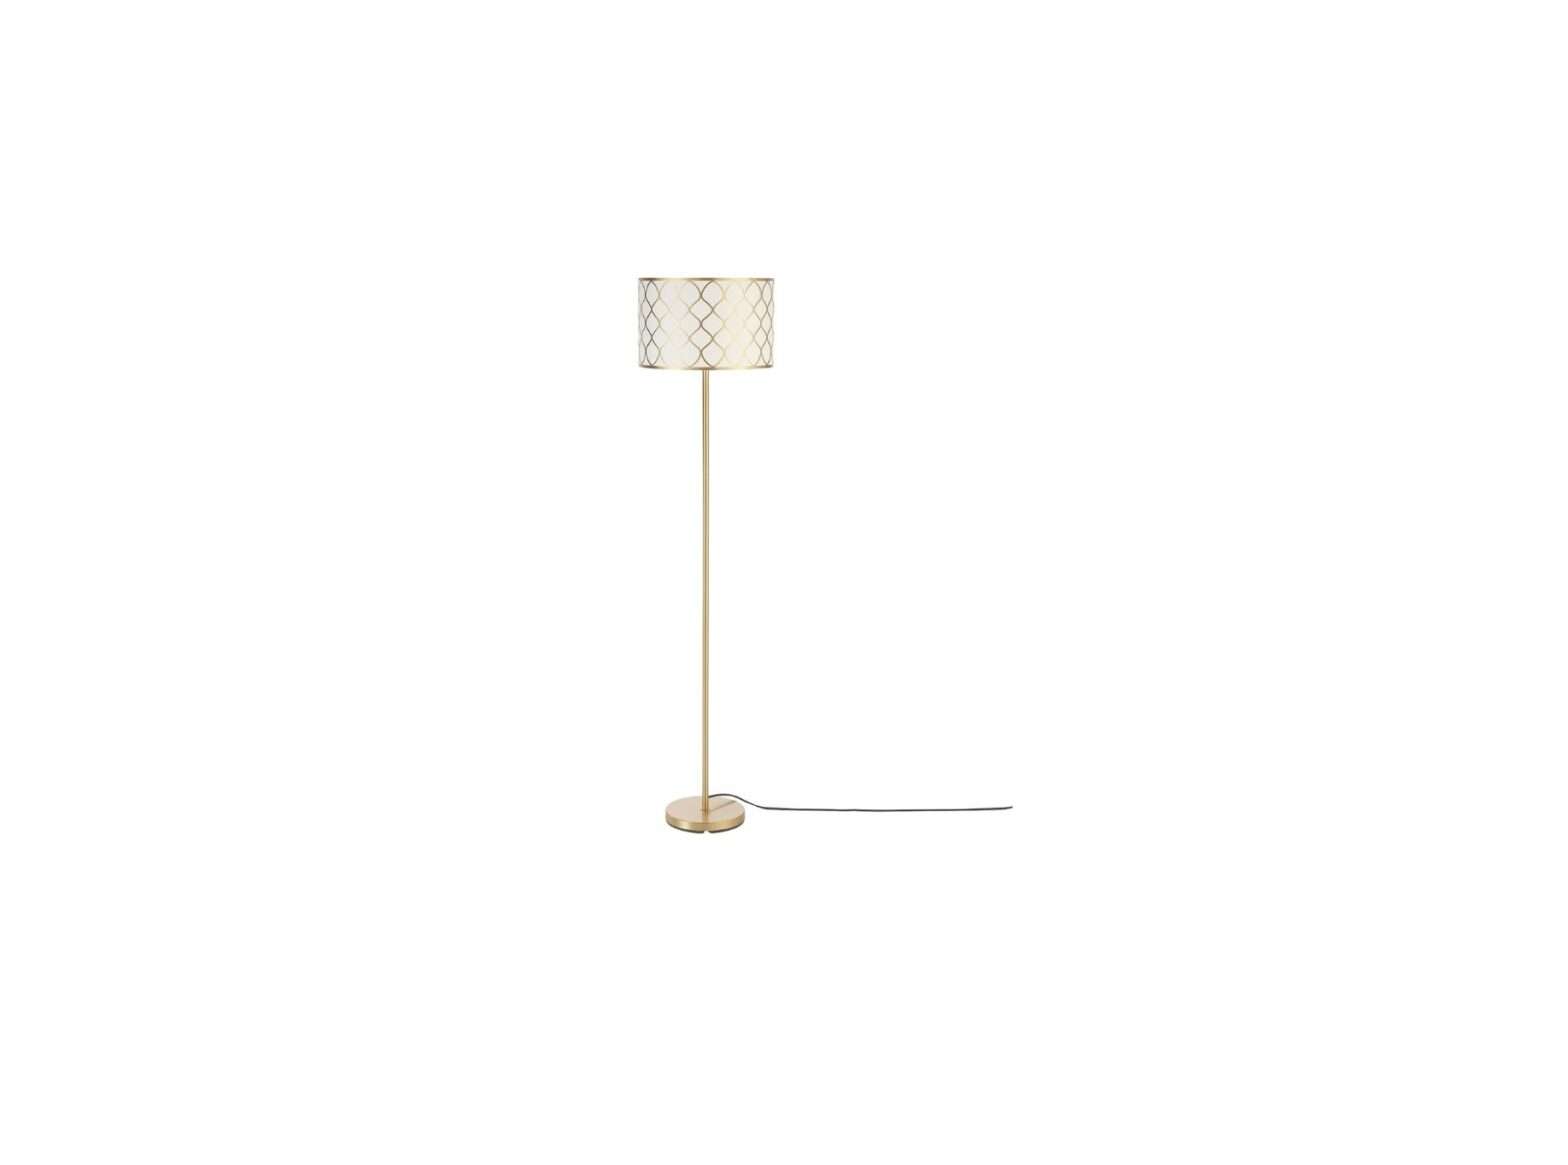 globe 91002364 Kinsley 65 Inch Matte Brass Floor Lamp with Metal Mesh over Cotton Shade User Manual